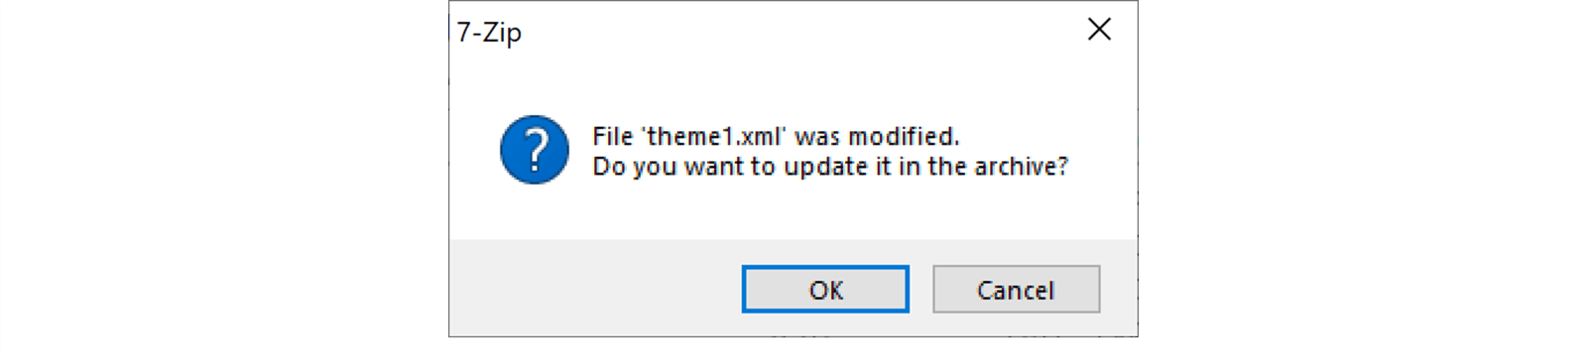 Screenshot of pop-up: "File theme1.xml was modified. Do you want to update it in the archive?" Two buttons 'OK' and 'Cancel'